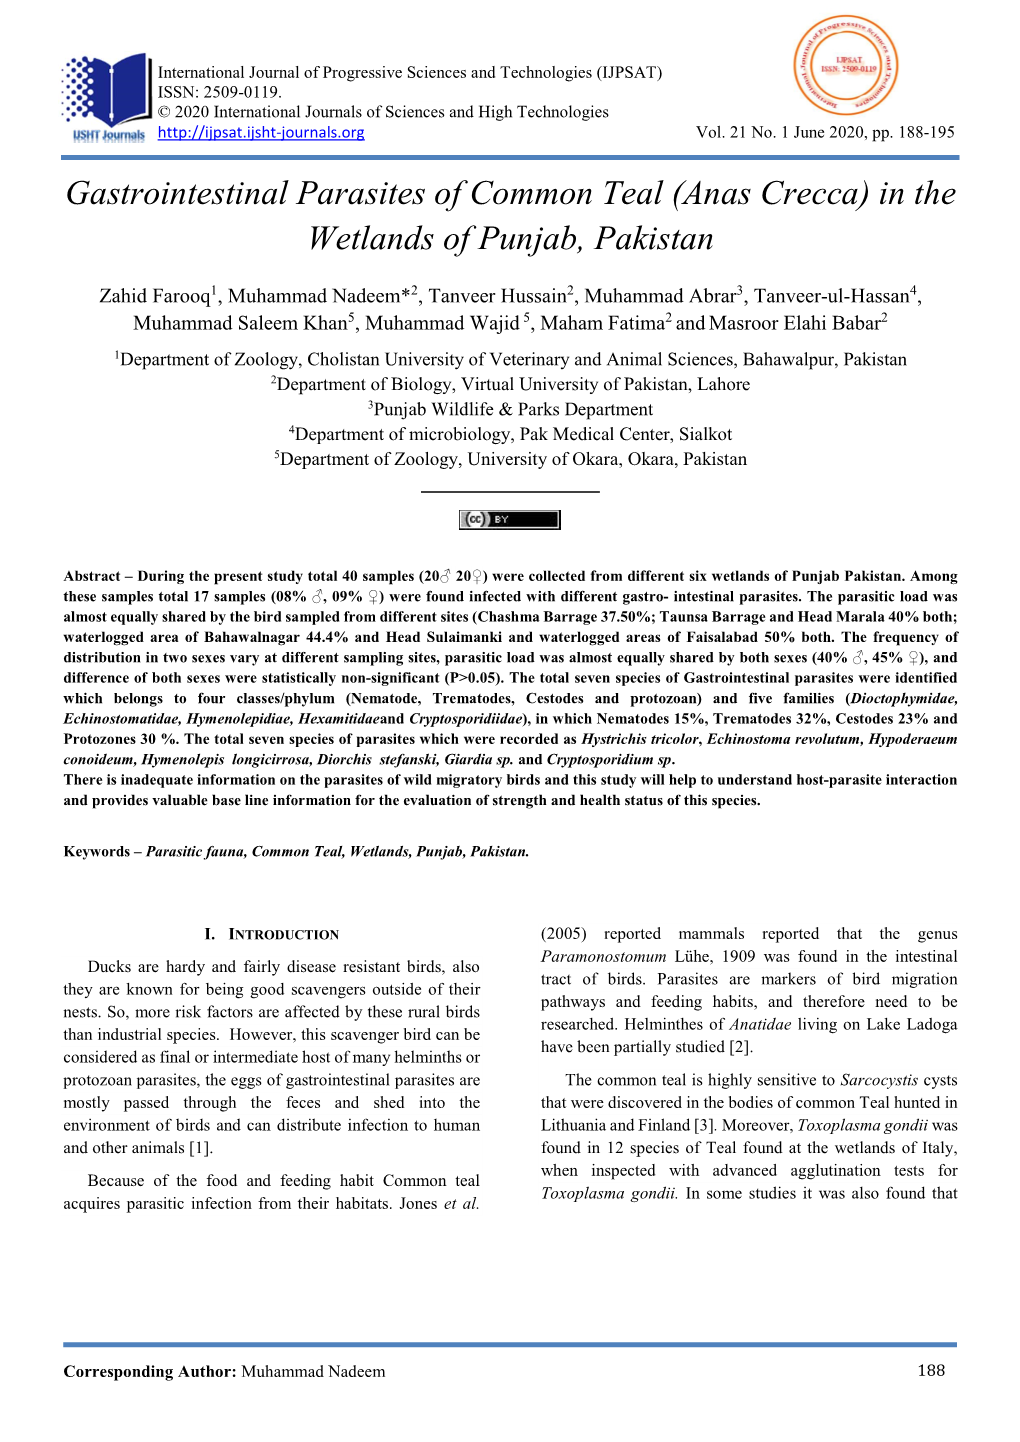 Gastrointestinal Parasites of Common Teal (Anas Crecca) in the Wetlands of Punjab, Pakistan